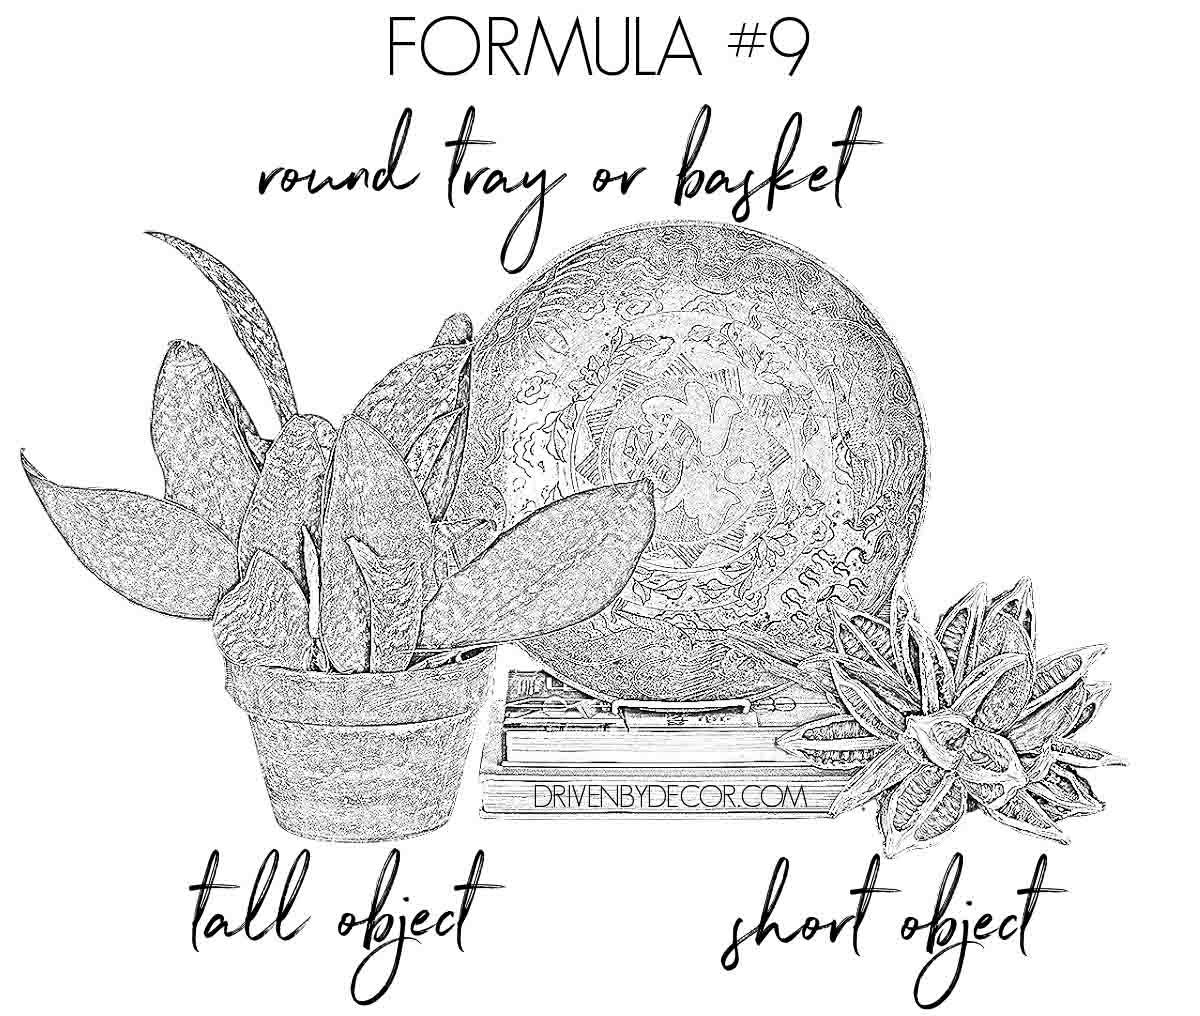 Formula for how to decorate a bookshelf - tall object + round tray + short object